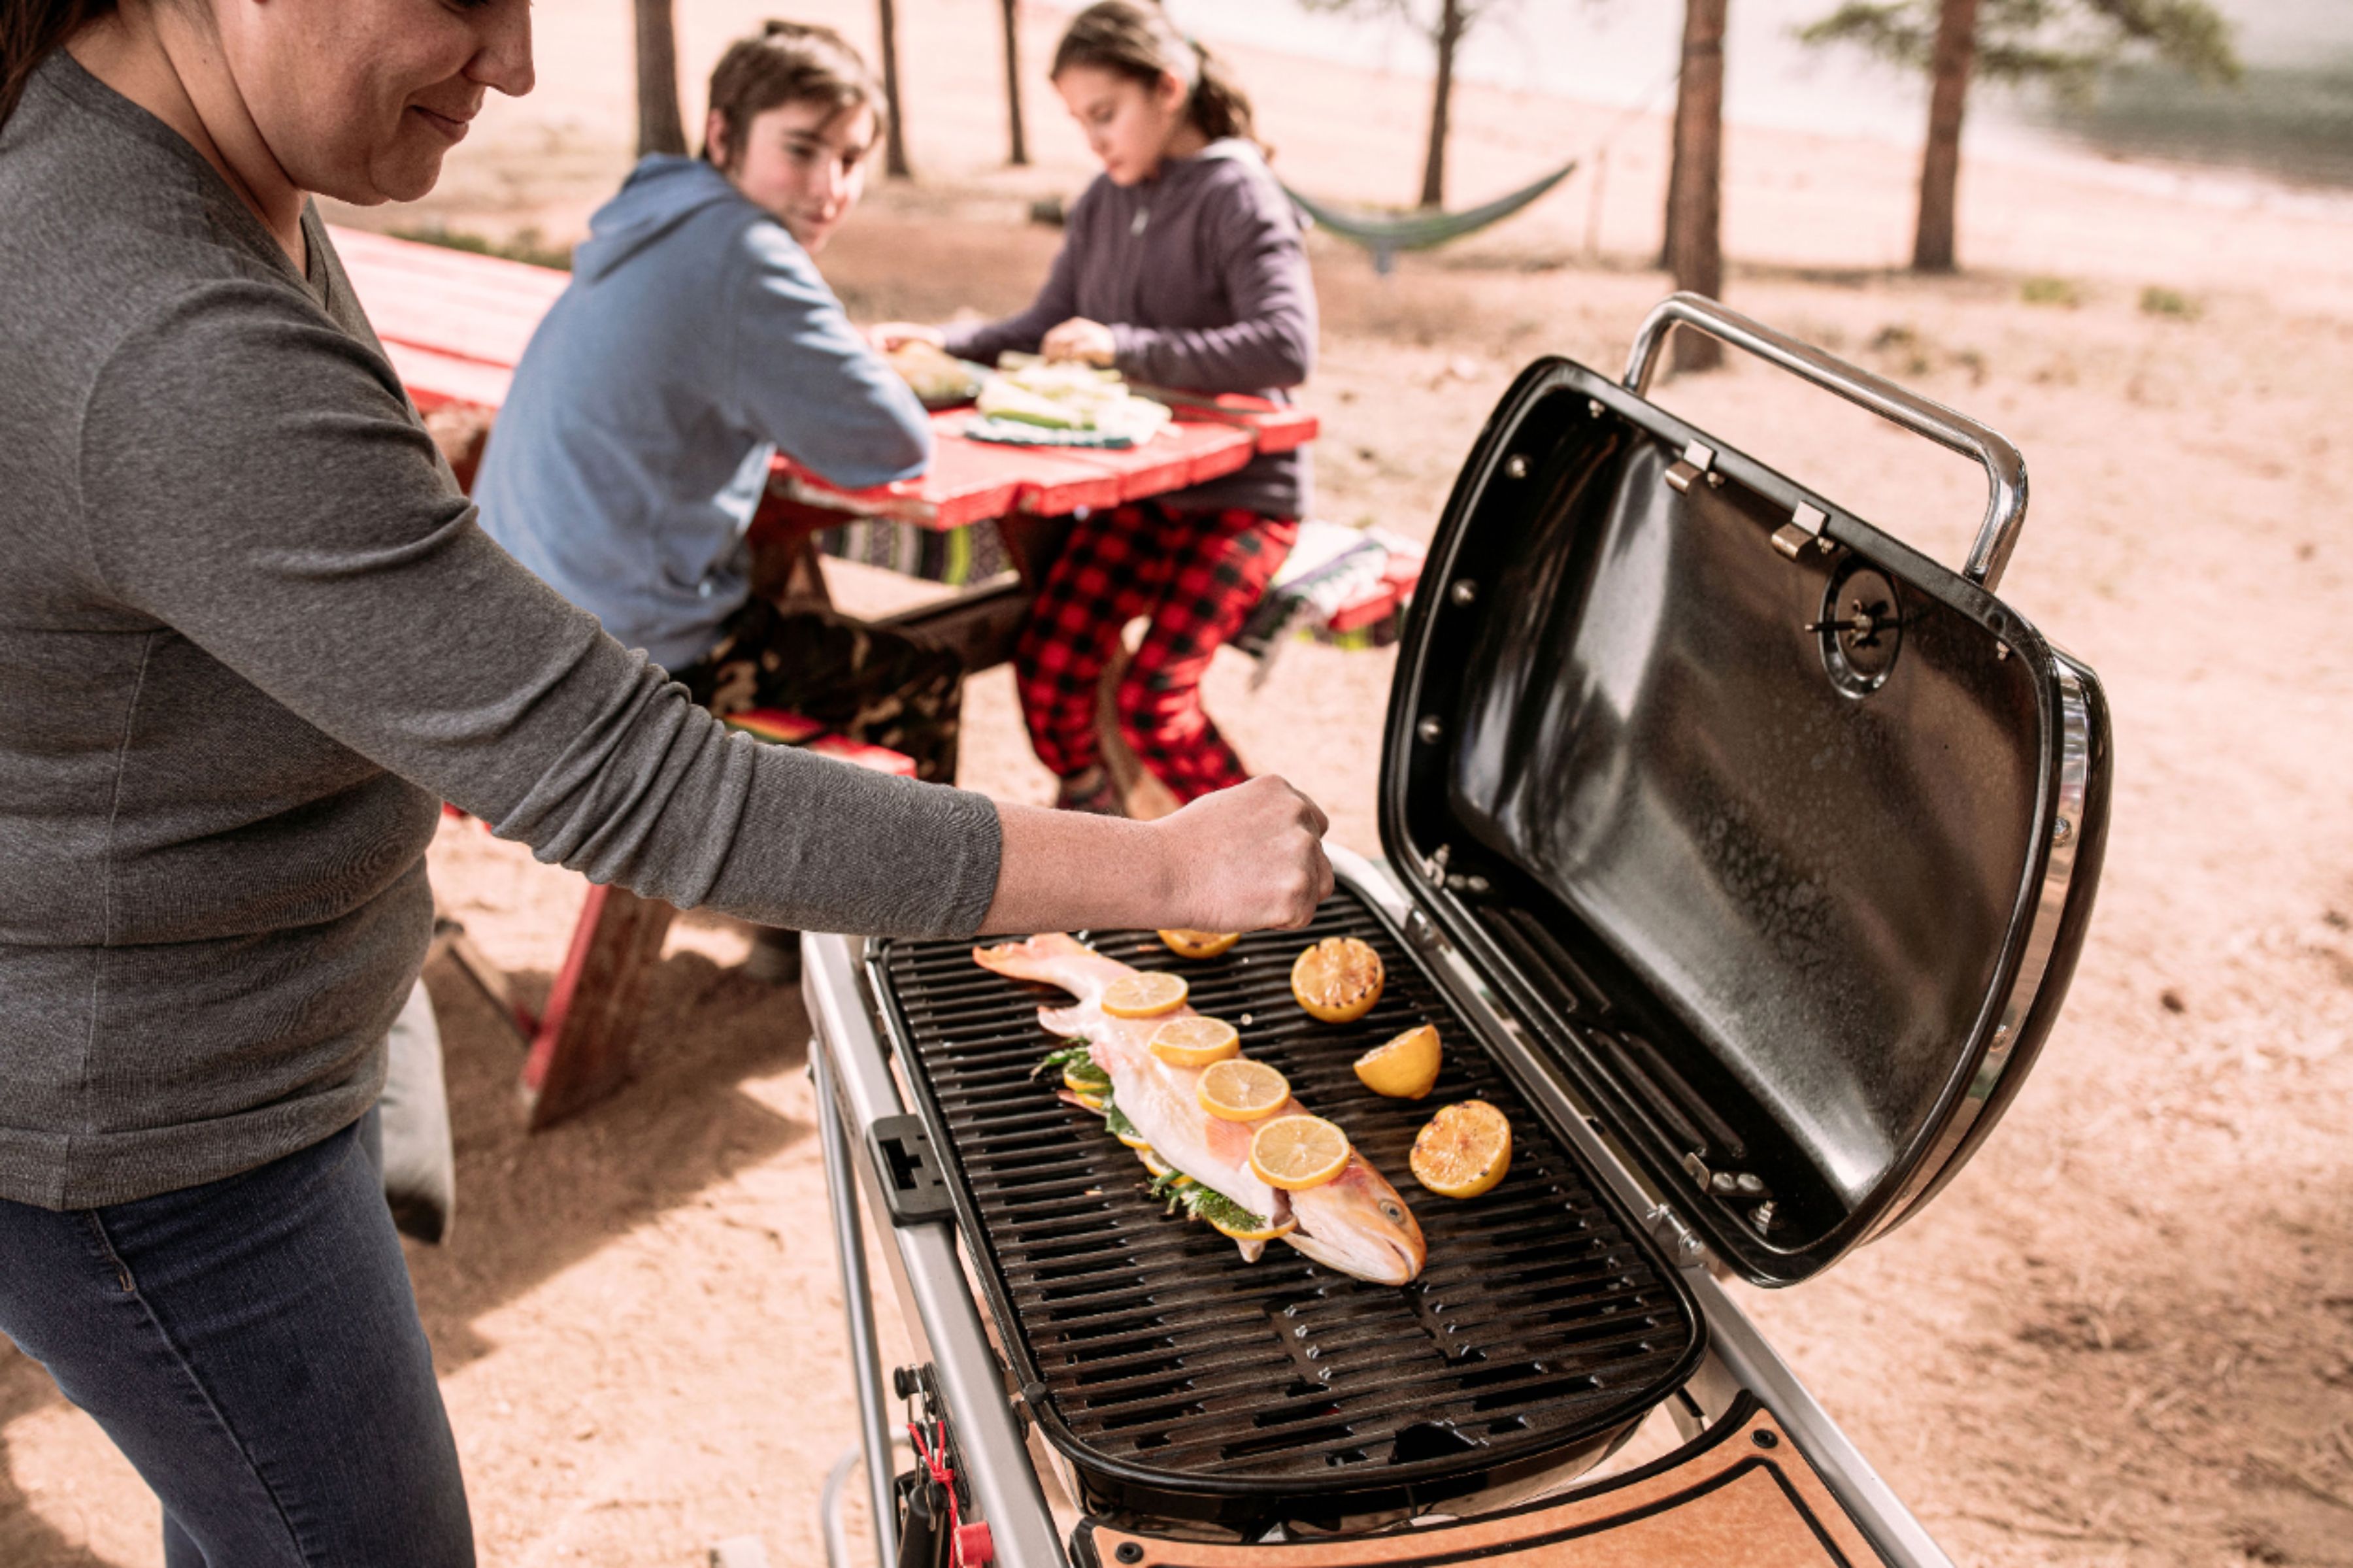 Cuisinart Venture Gas Grill Makes Outdoor Cooking Fast and Easy